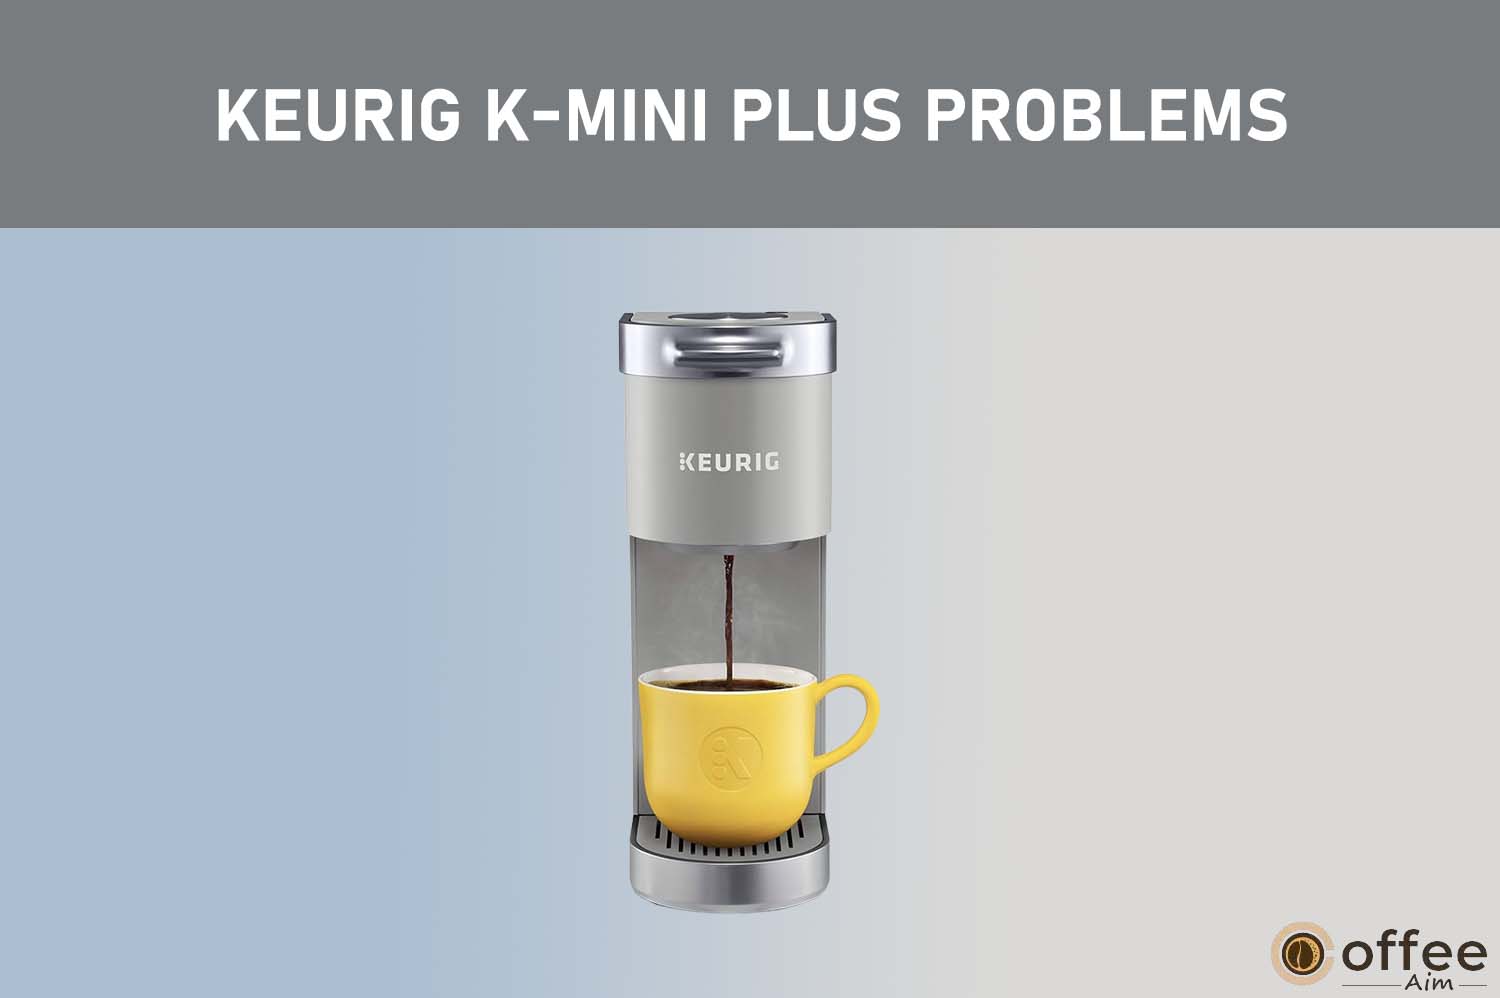 Featured image for the article "Keurig K-Mini Plus Problems"